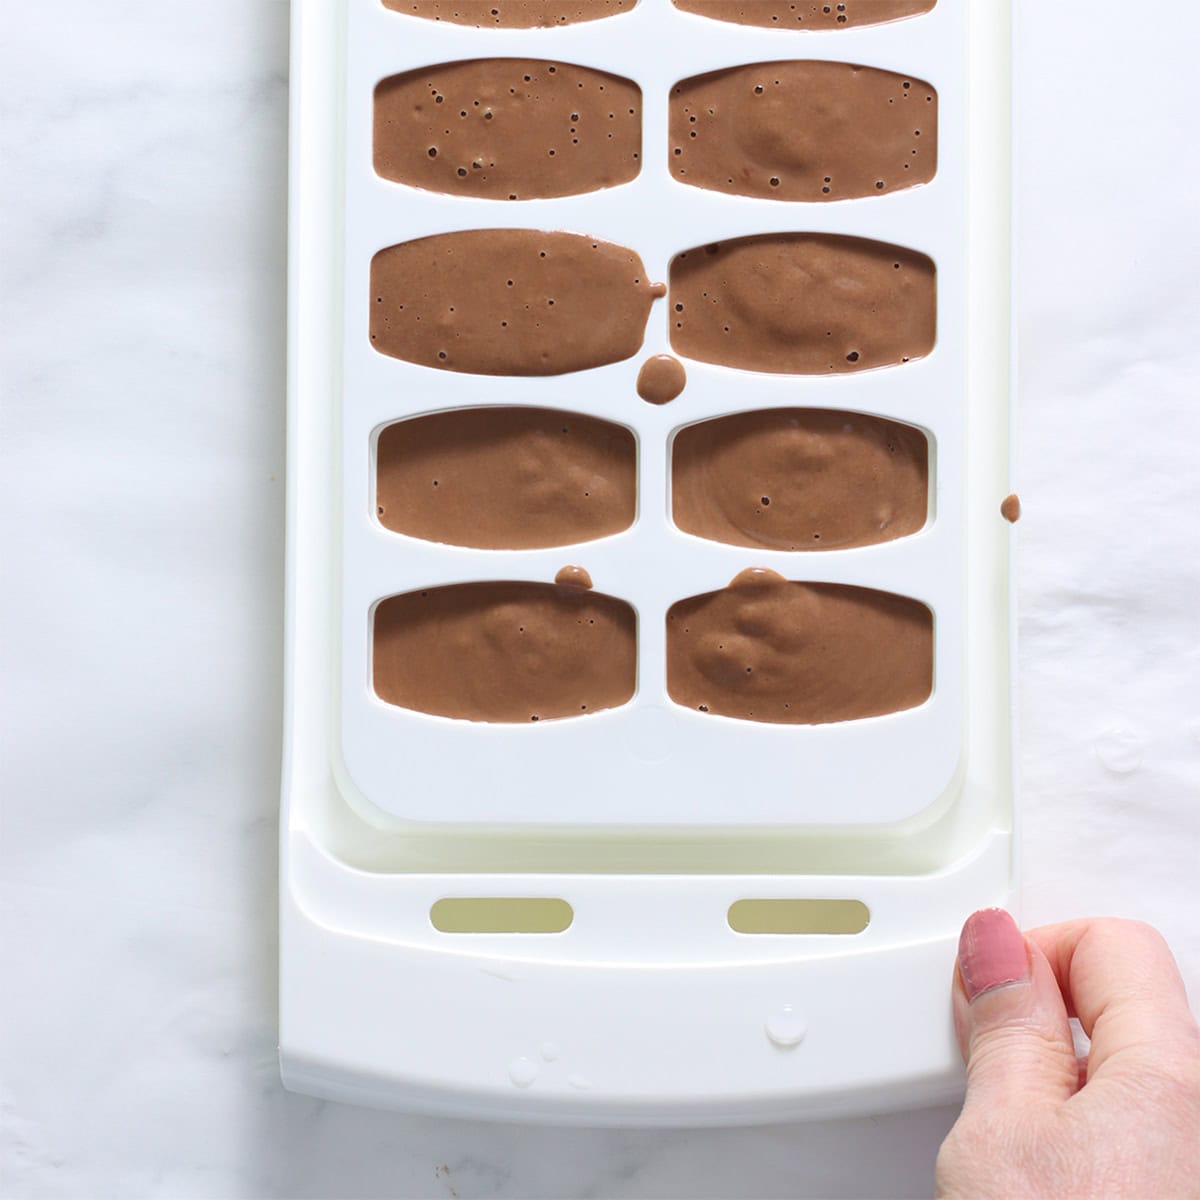 oreo ice cream blended and in ice cube trays.